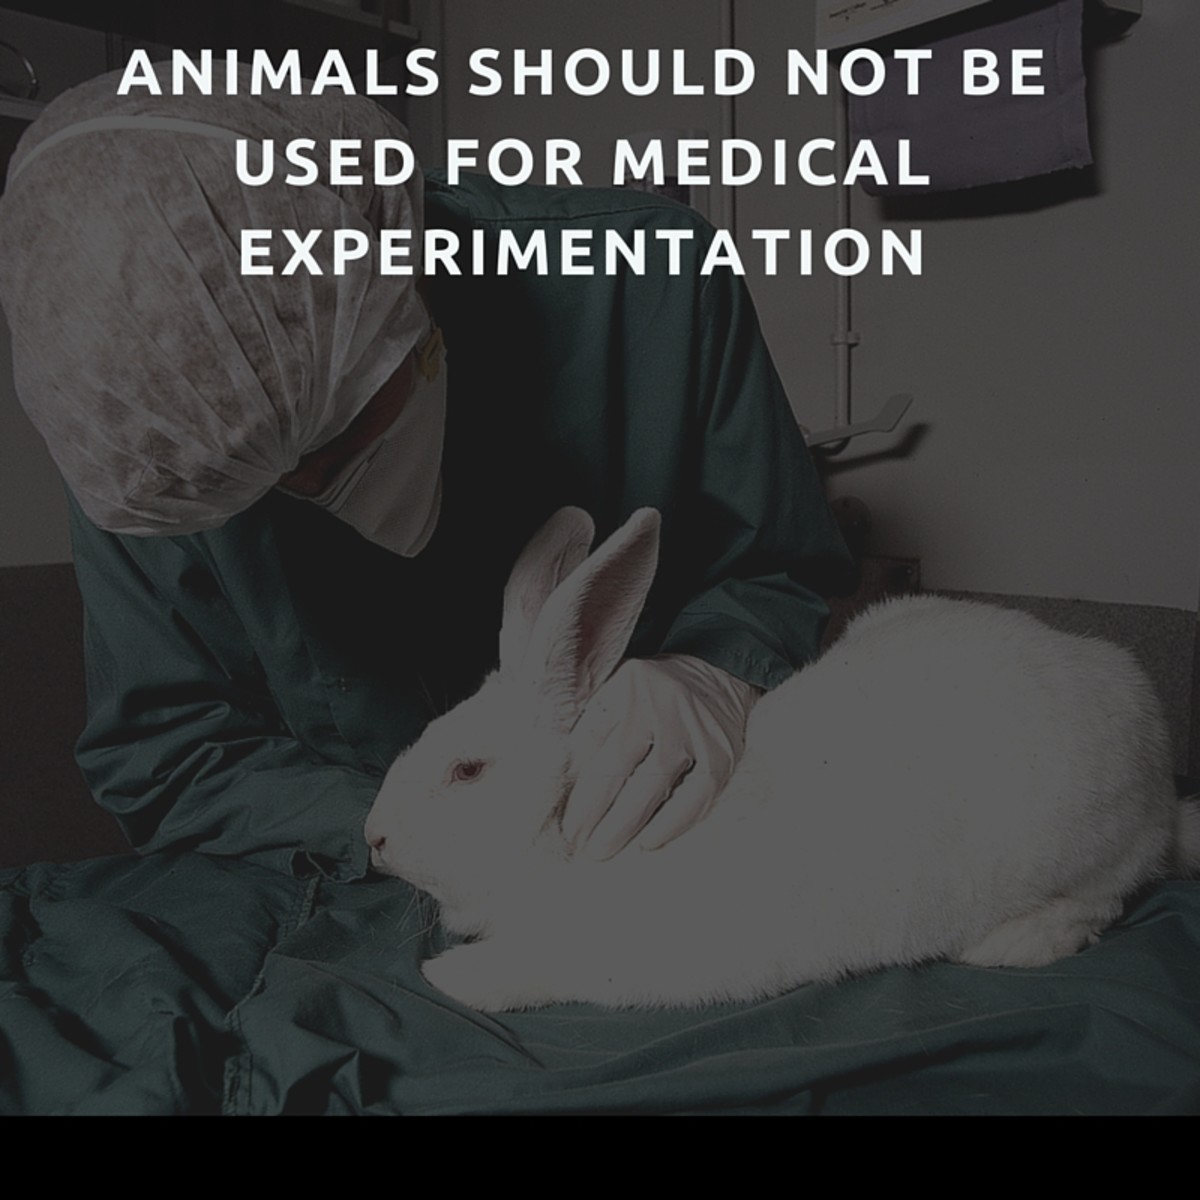 Animals should not be used for medical experimentation